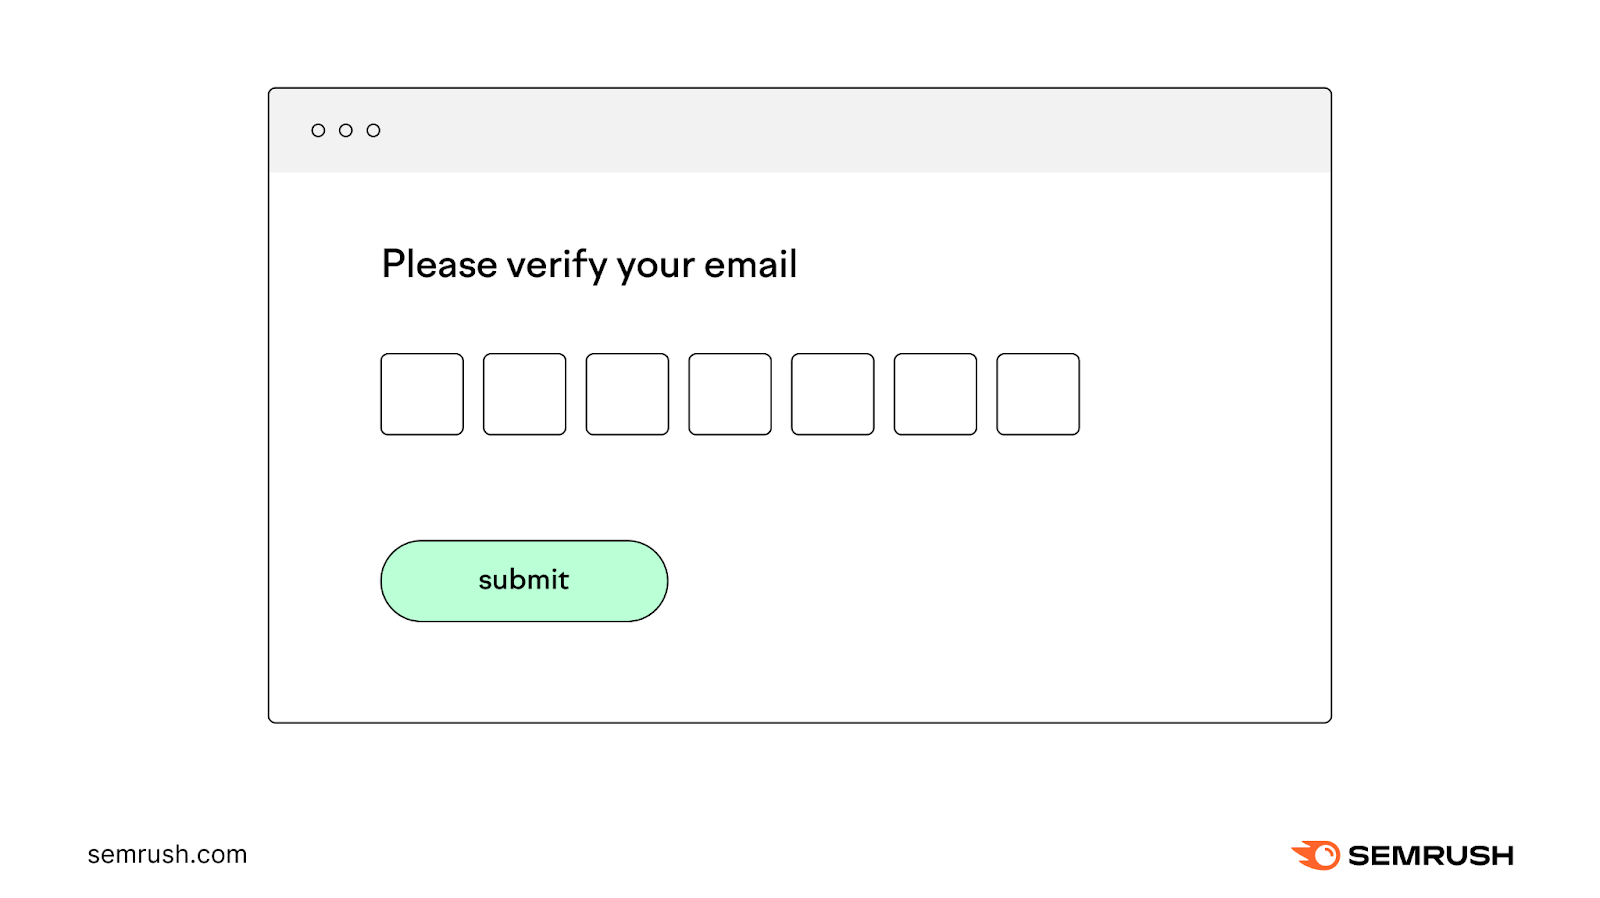 A confirmation page, with "Please verify your email" message